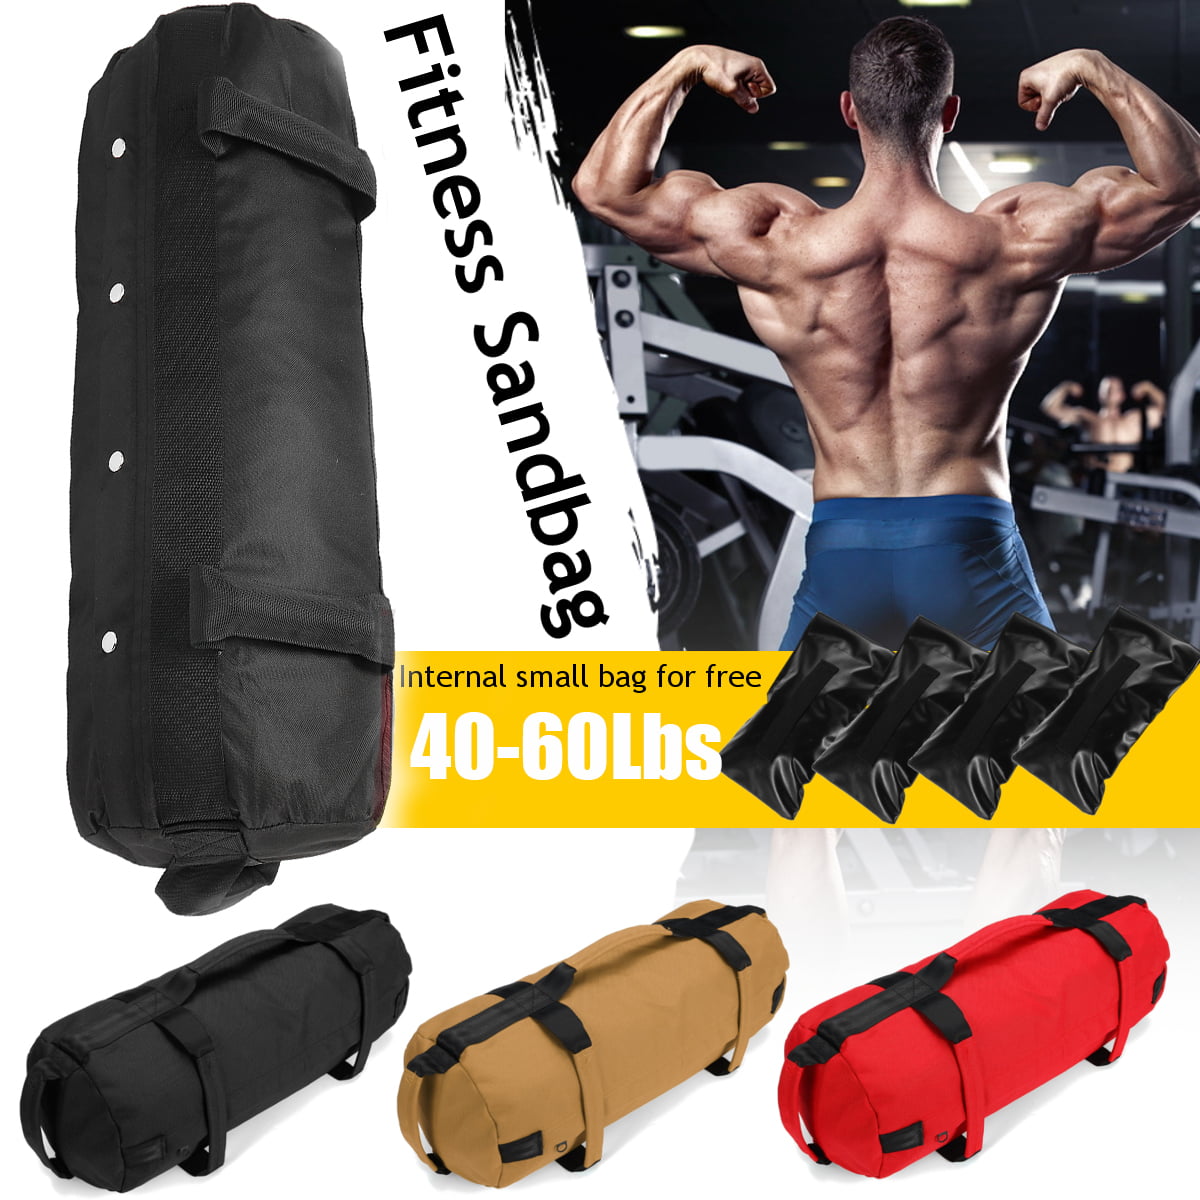 ARD CHAMPS™ FITNESS GYM  STRENGTHEN WORKOUT SAND BAG BULGARIAN 5 To 28 KG CANVAS 